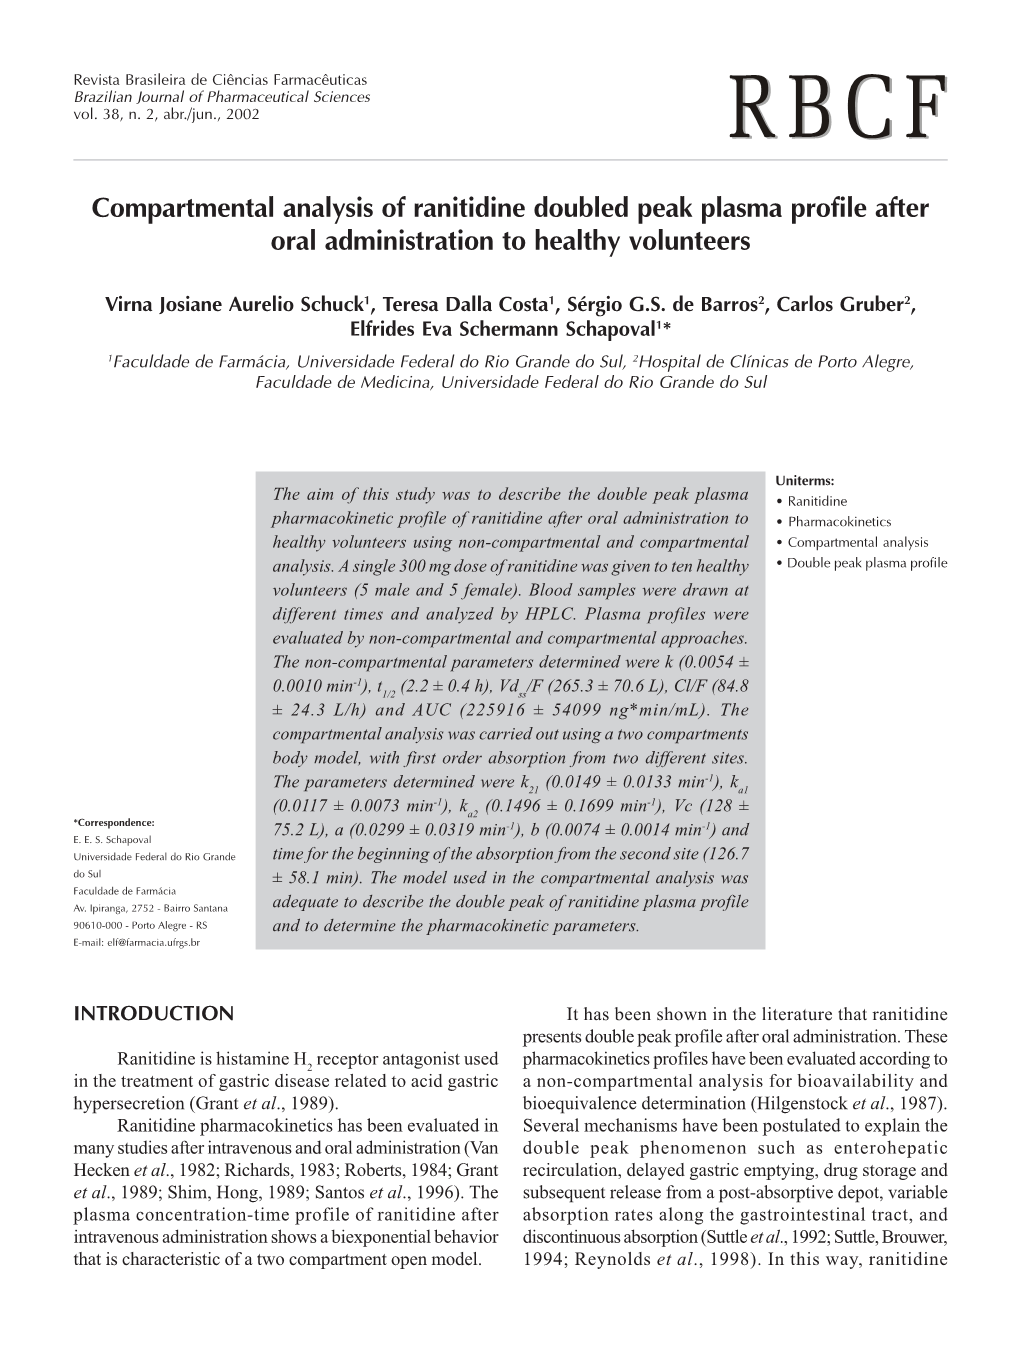 Compartmental Analysis of Ranitidine Doubled Peak Plasma Profile After Oral Administration to Healthy Volunteers